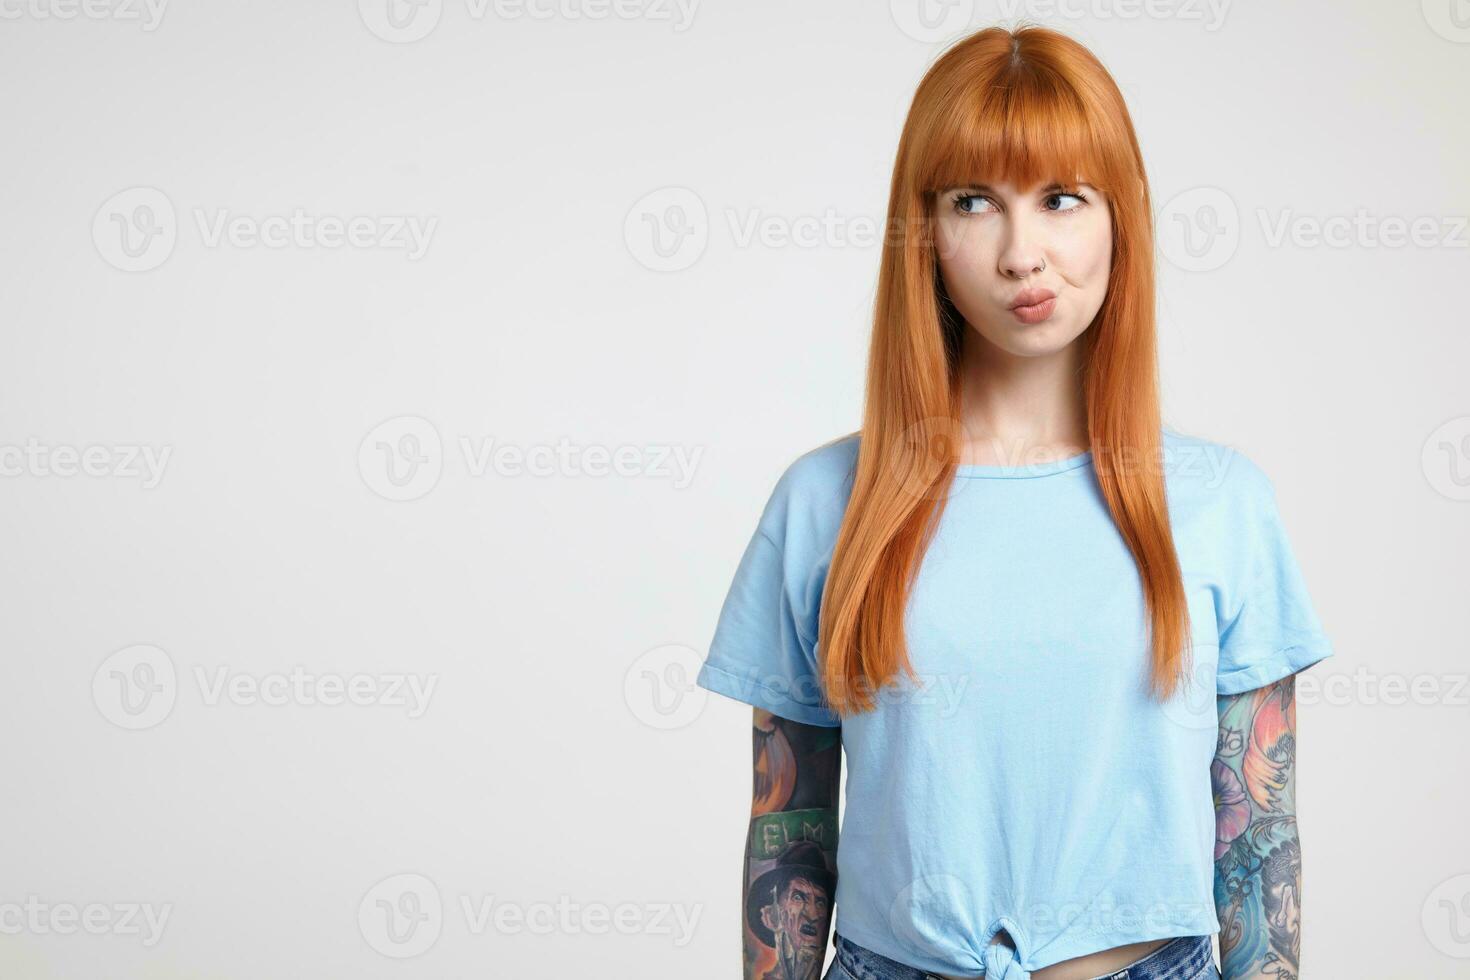 Pensive young pretty redhead tattooed female looking severely aside and twisting her mouth while standing against white background in blue t-shirt photo